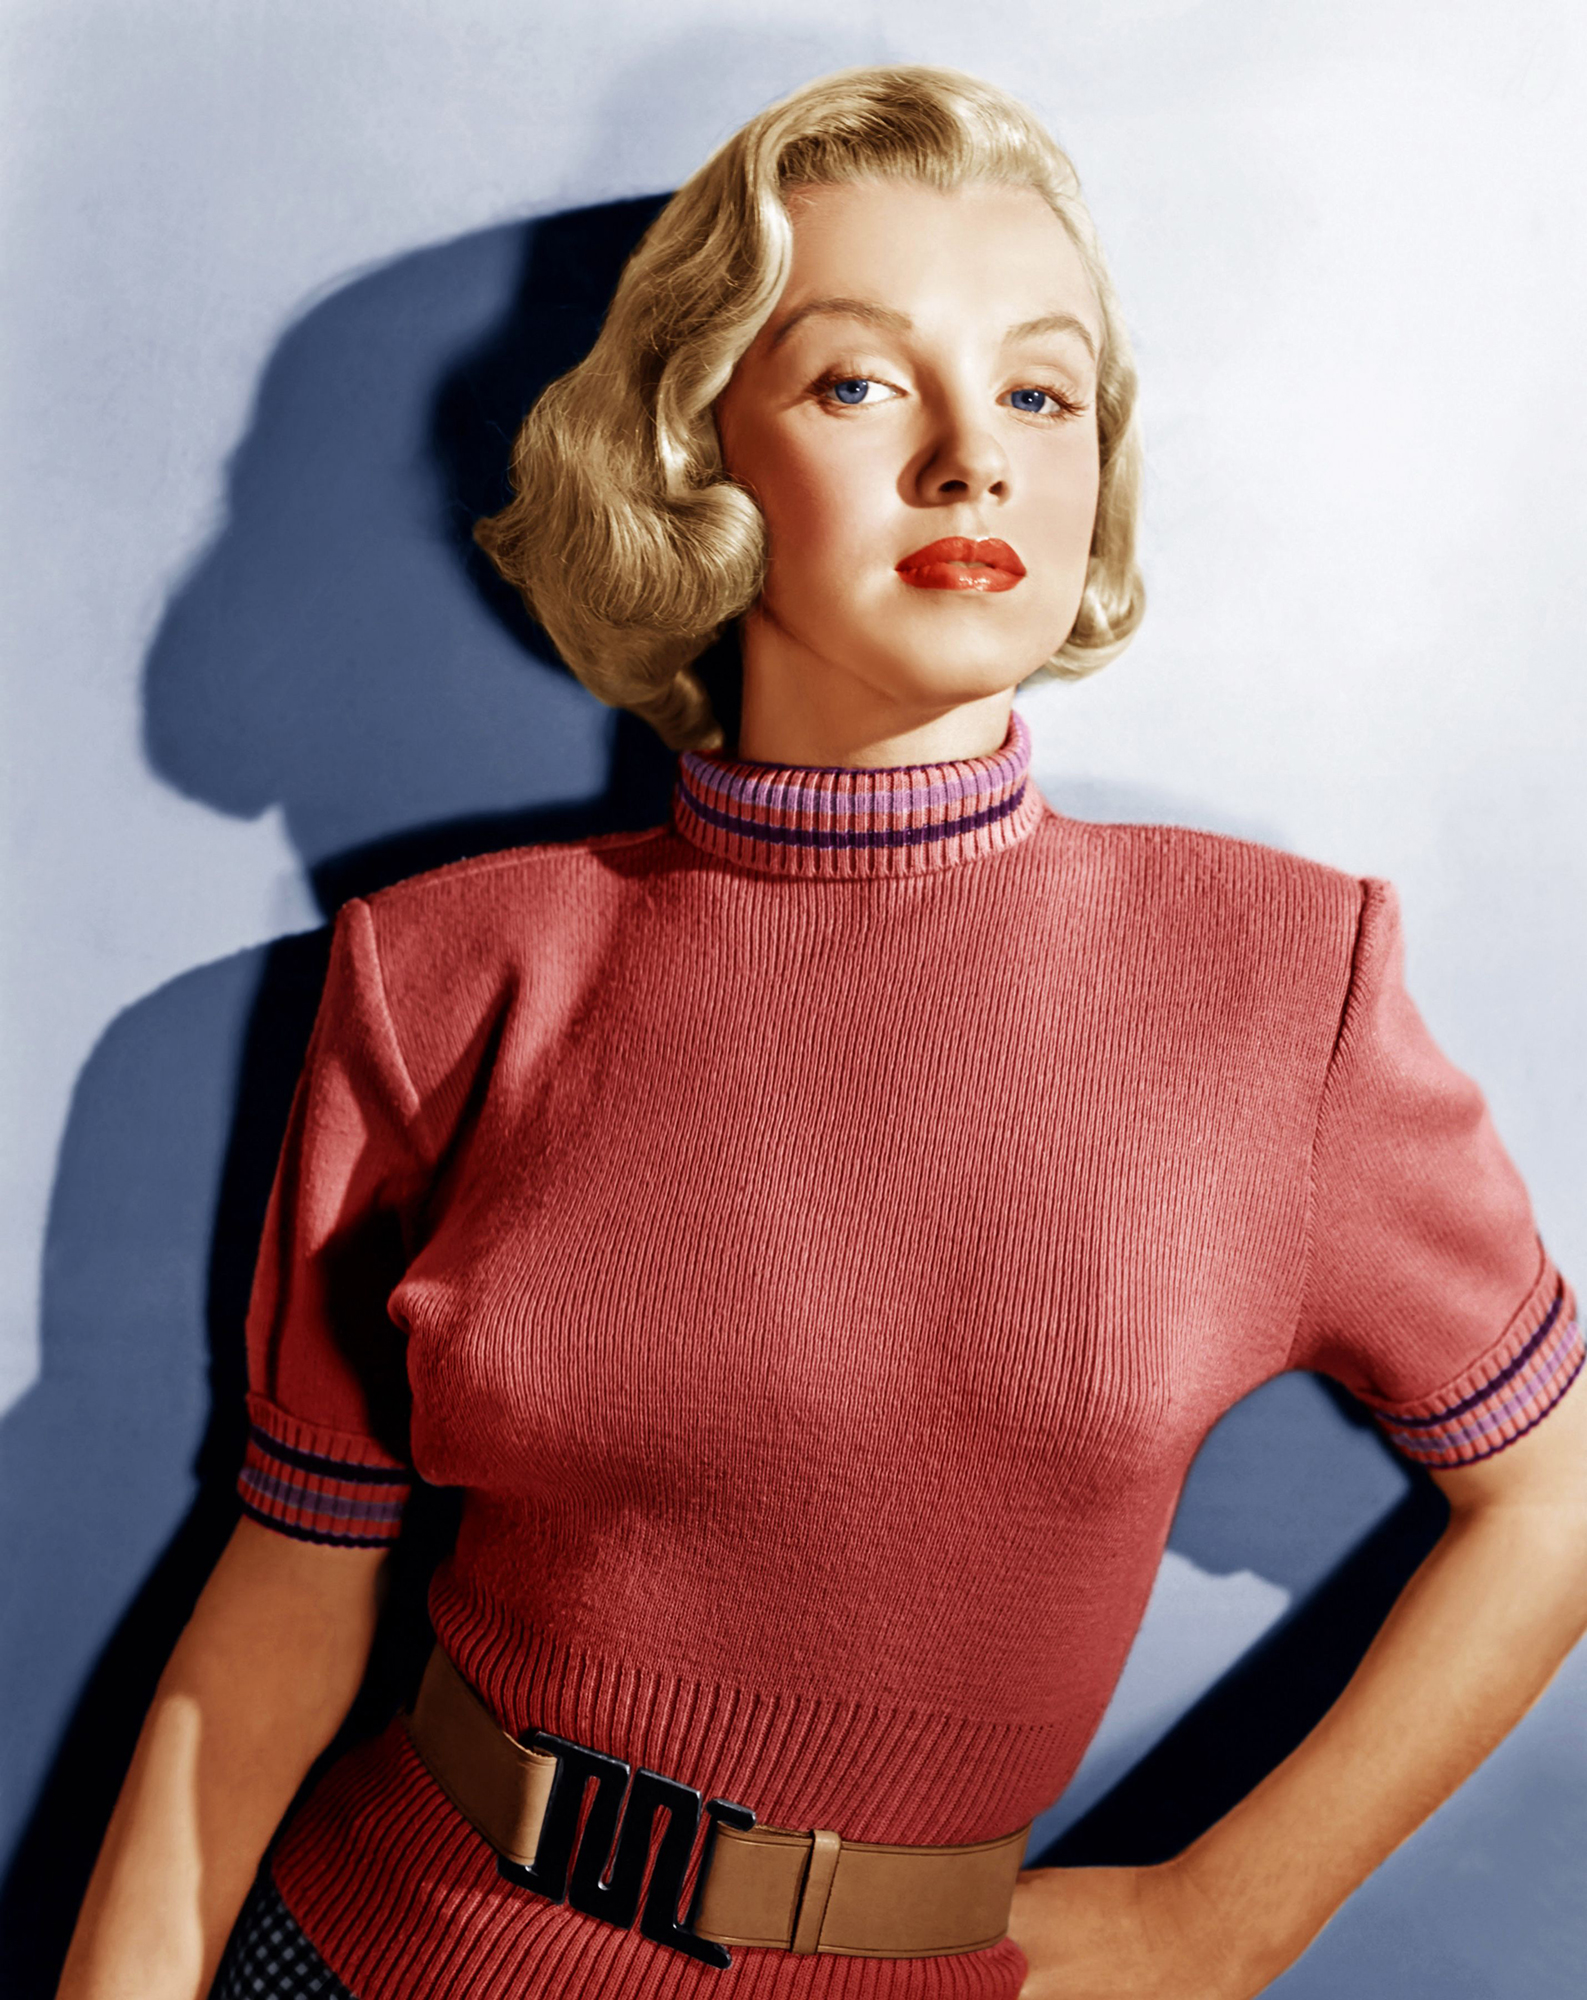 The Killing of Marilyn Monroe' Explores Her Tough Road to Stardom